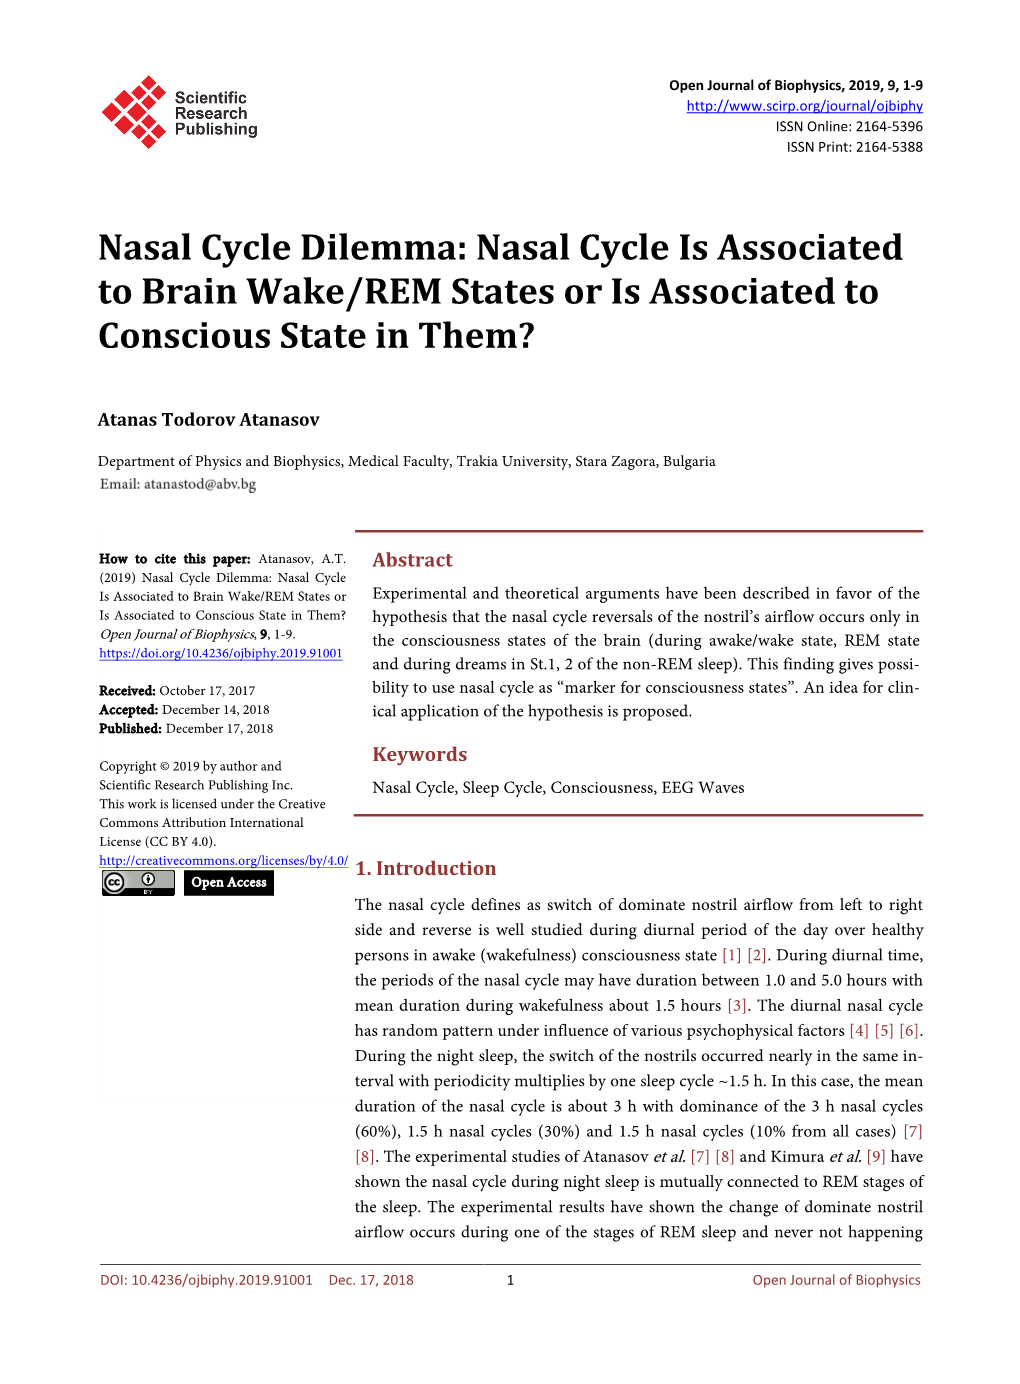 Nasal Cycle Dilemma: Nasal Cycle Is Associated to Brain Wake/REM States Or Is Associated to Conscious State in Them?